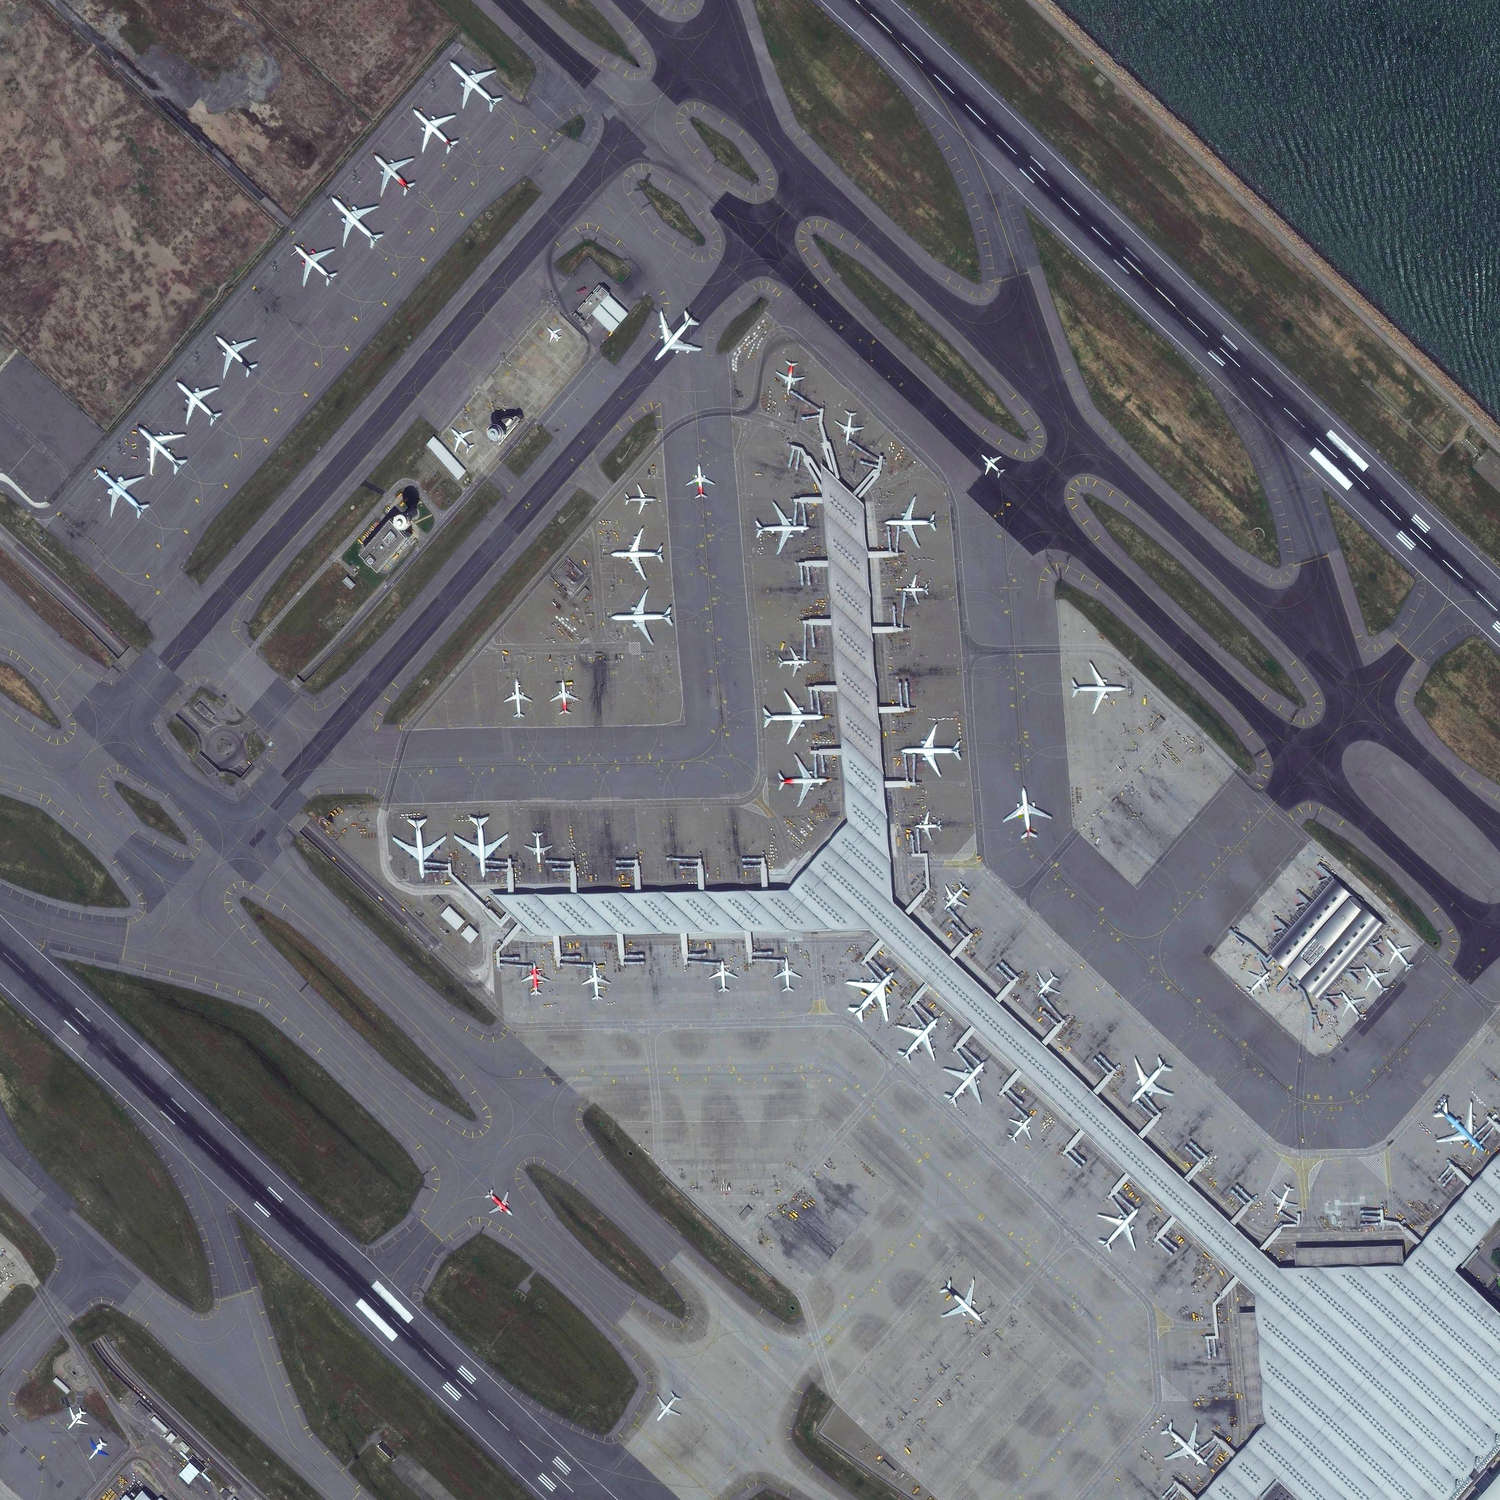   8/11/2015 Hong Kong International Airport Chek Lap Kok, Hong Kong 22°18′32″N 113°54′52″E   Tonight I’m headed off on a trip to China, via Hong Kong International Airport. The facility handles more than 63 million passengers each year. Terminal 1, seen here, is the third largest airport passenger building in the world, measuring more than 6 million square feet. I’ll do my best to post during my travels but apologies in advance if internet connection is spotty!